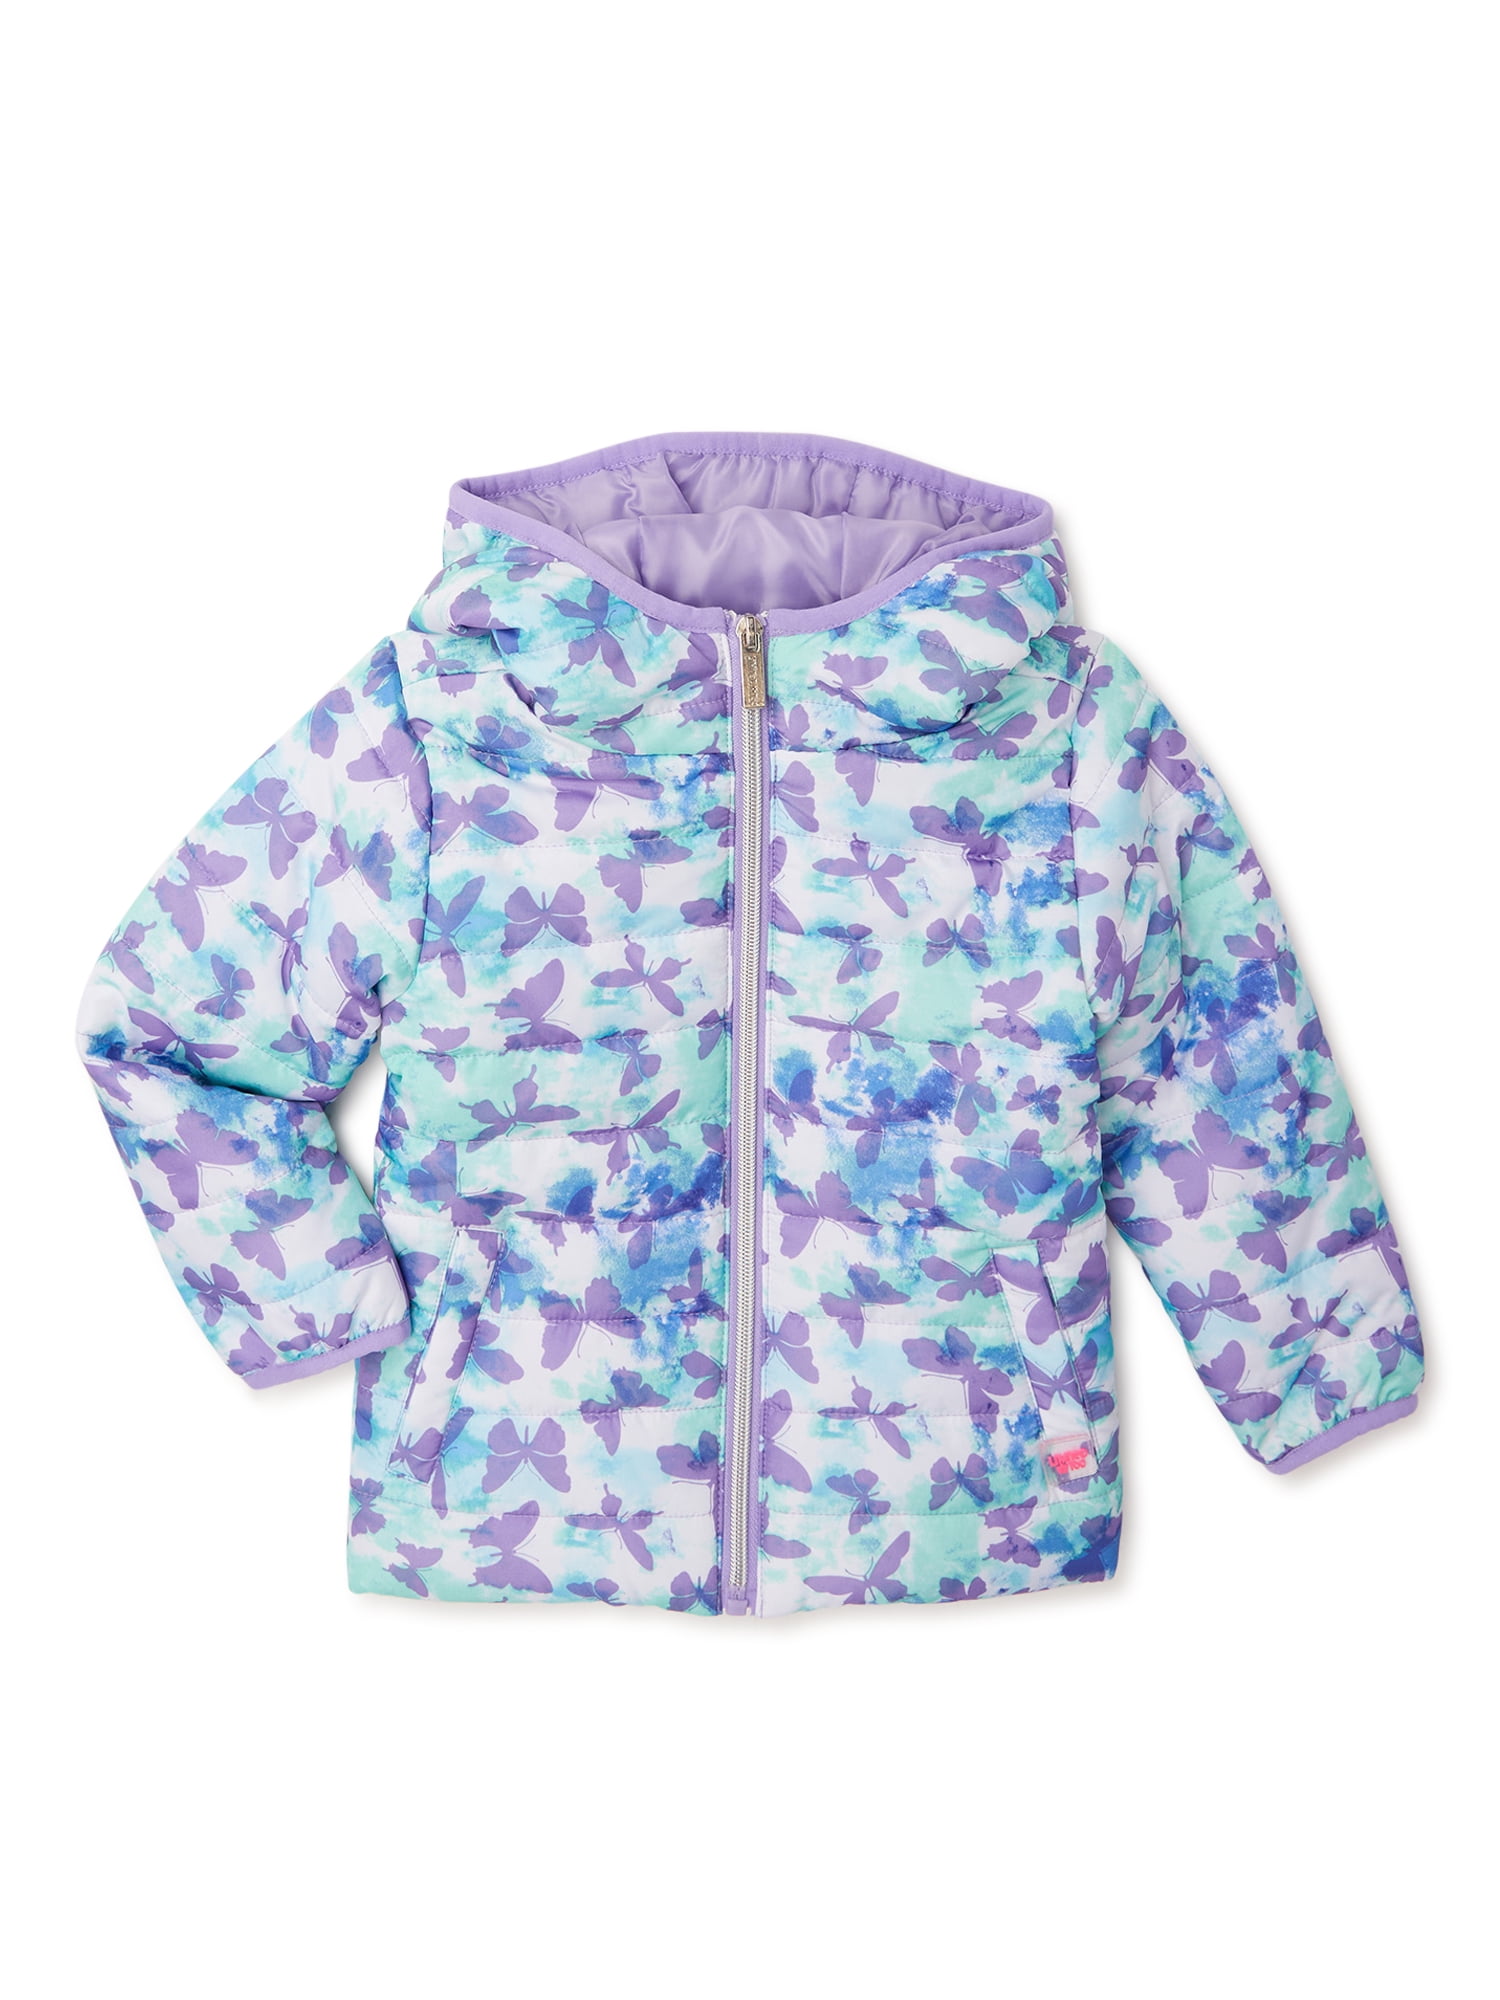 Infant Toddler Baby Kids Girls Butterfly Print Hoodie Tops Casual Clothes Coat 